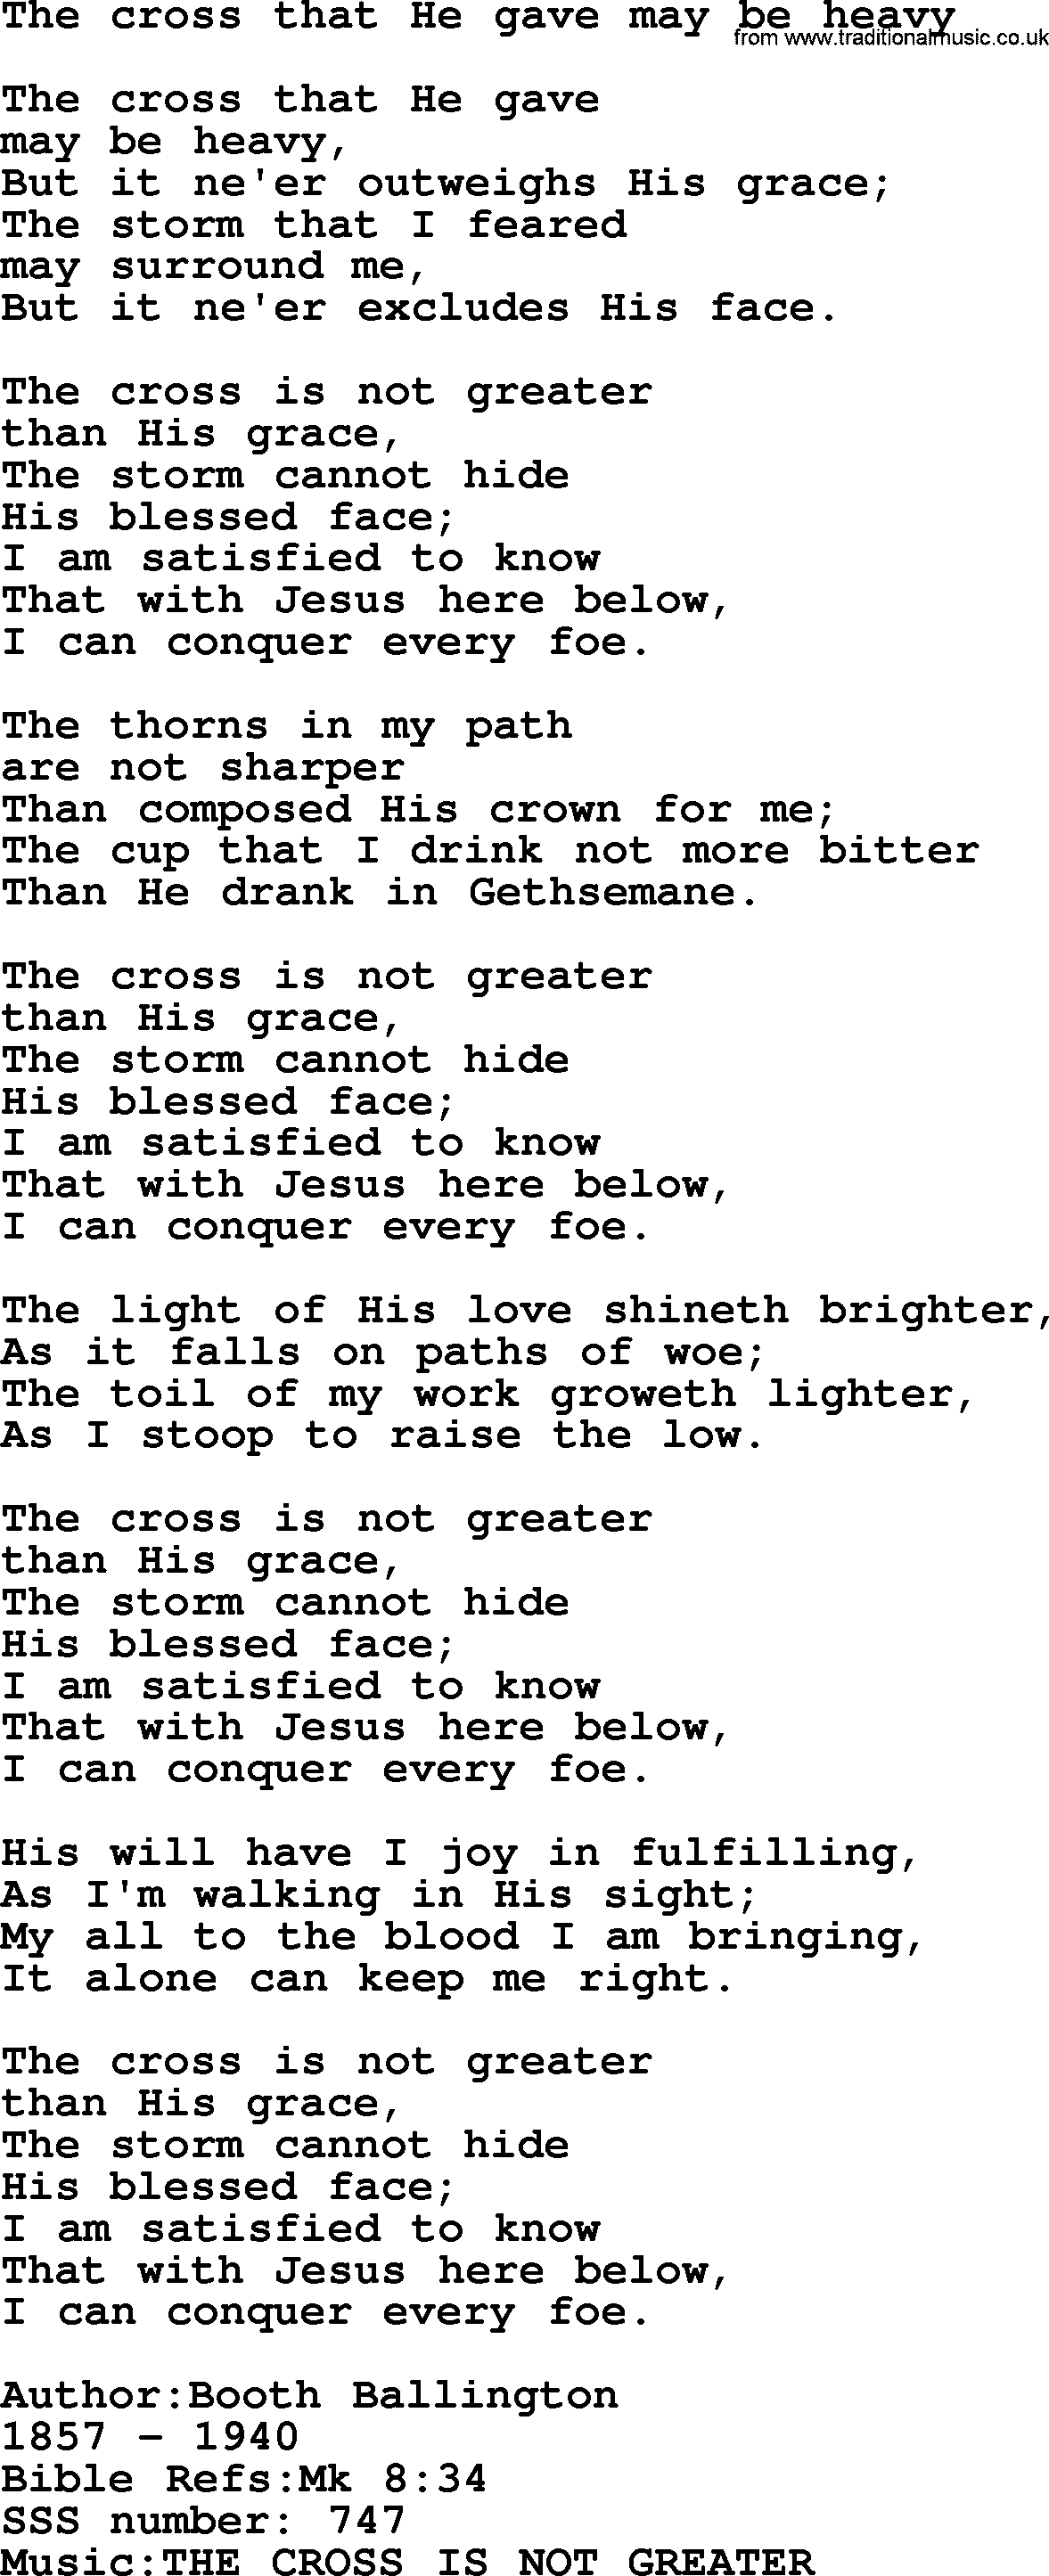 Sacred Songs and Solos complete, 1200 Hymns, title: The Cross That He Gave May Be Heavy, lyrics and PDF